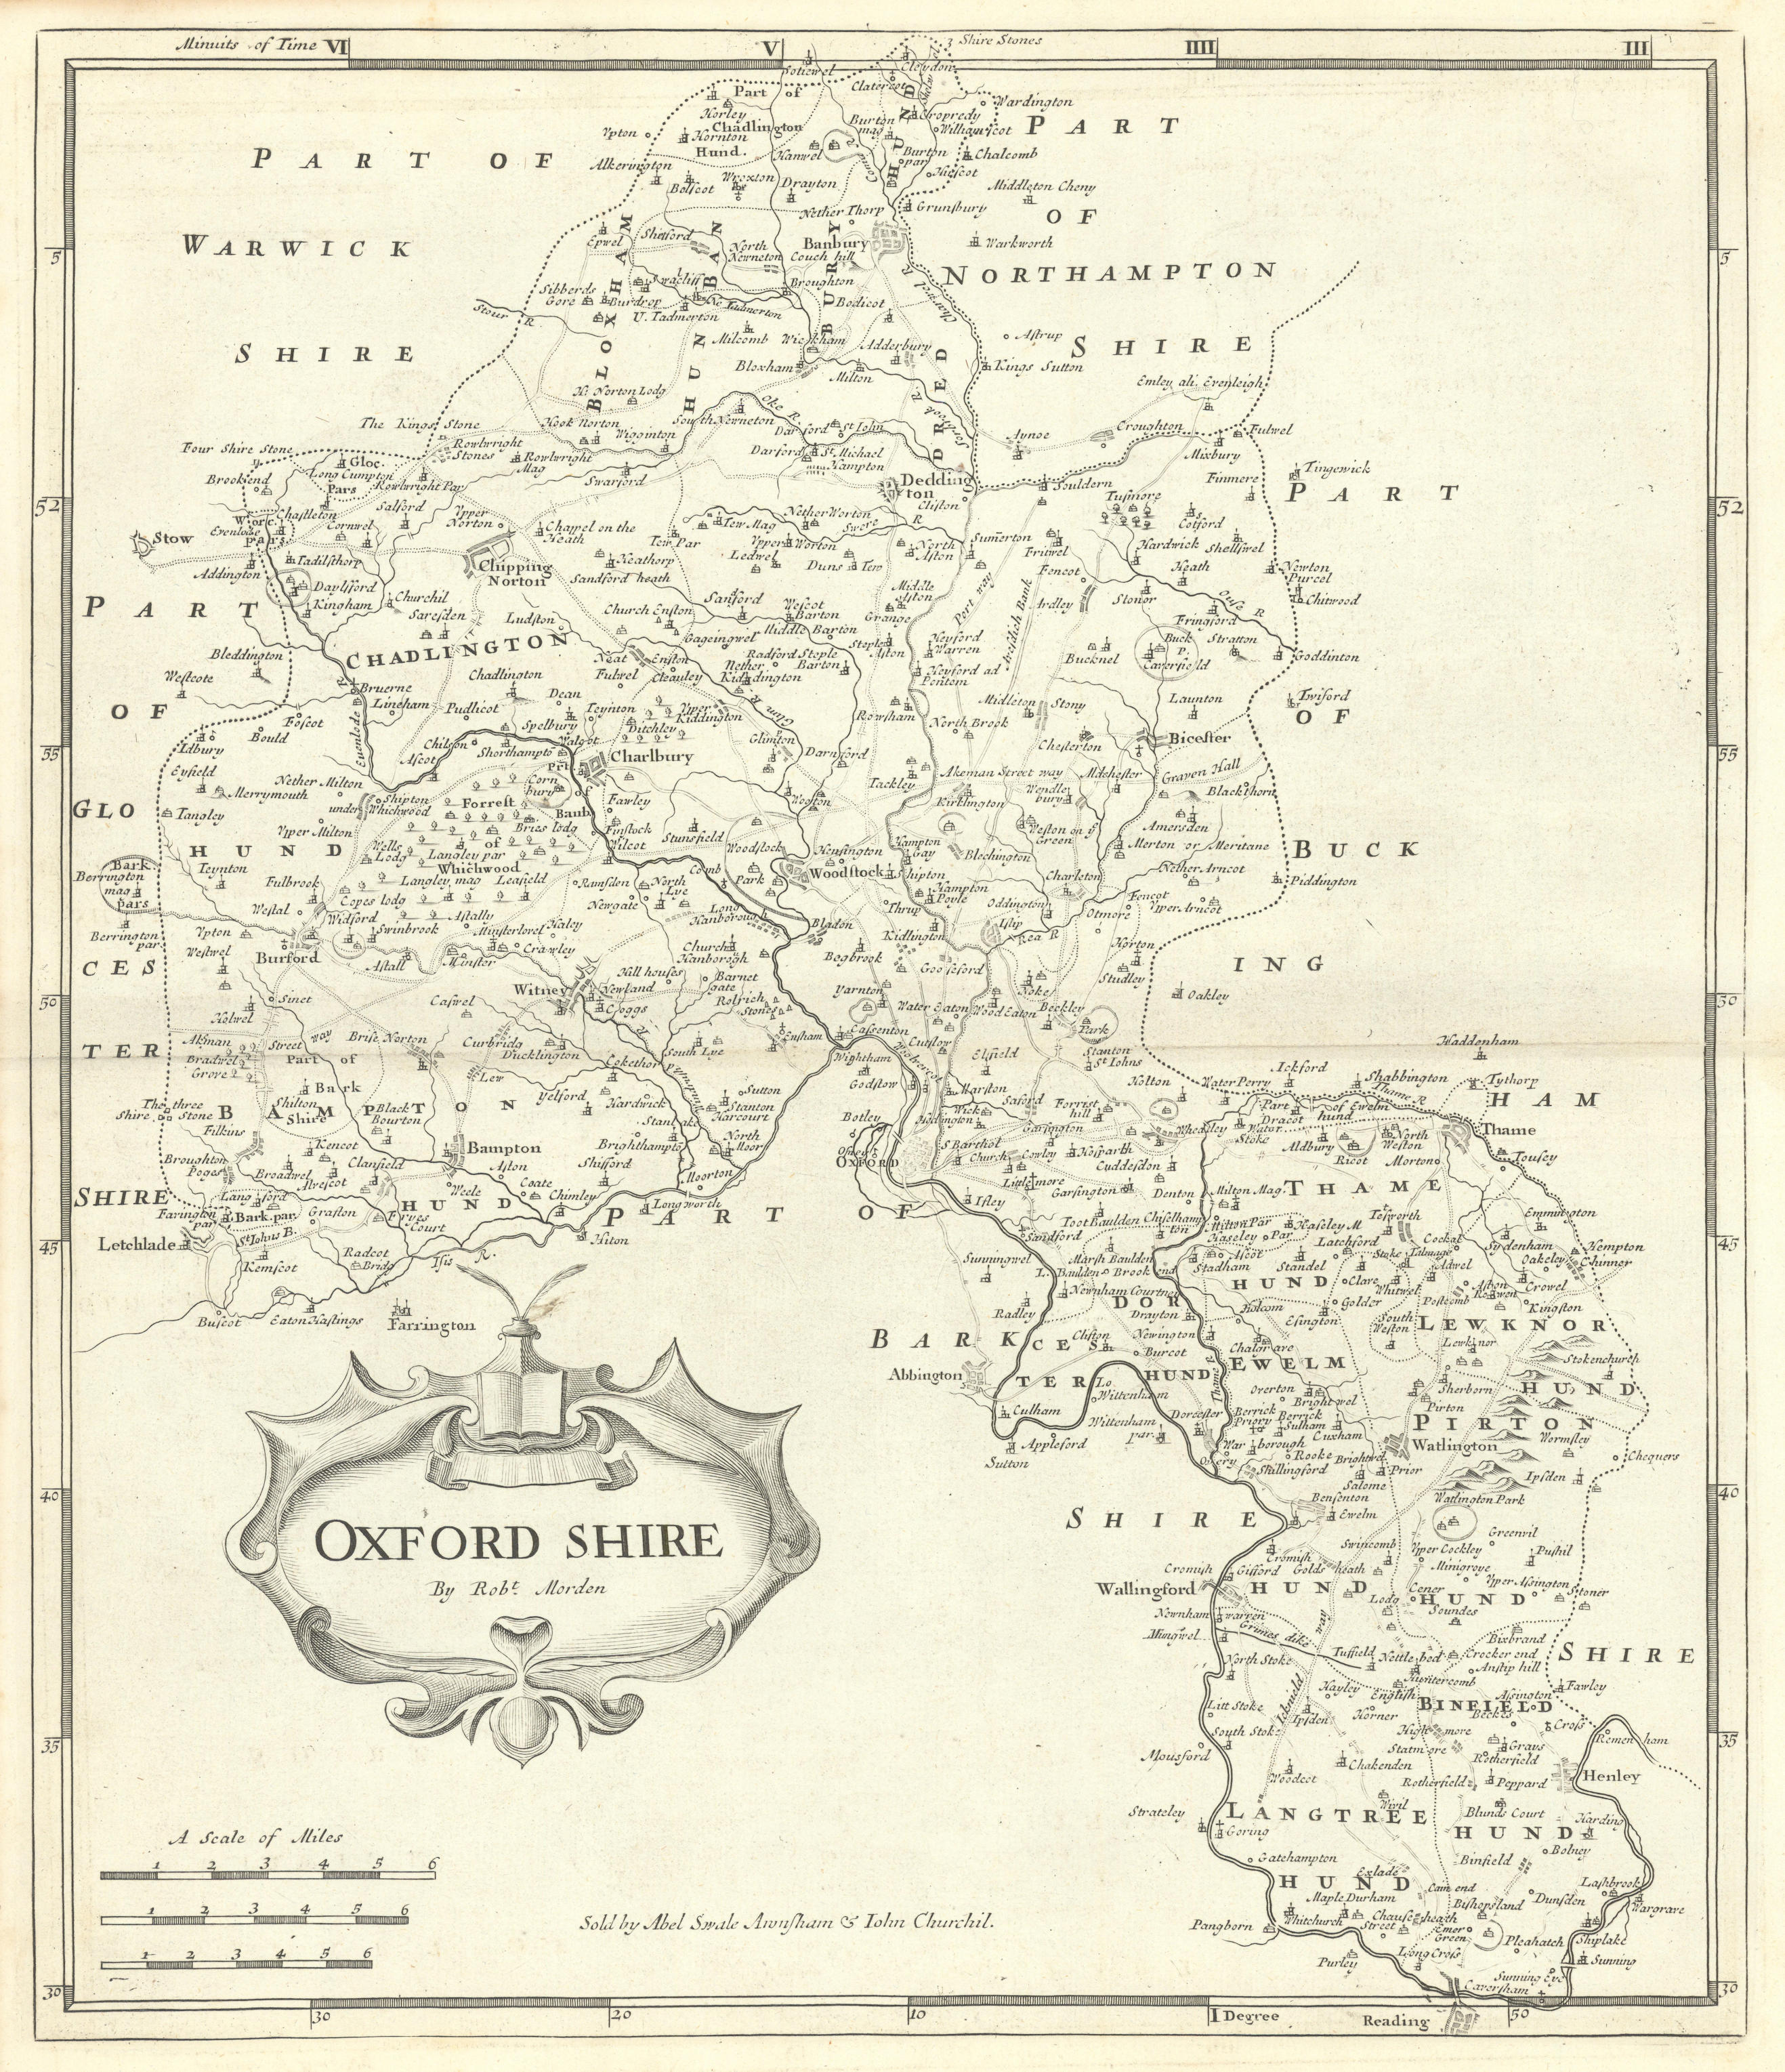 Associate Product Oxfordshire. 'OXFORD SHIRE' by ROBERT MORDEN from Camden's Britannia 1722 map